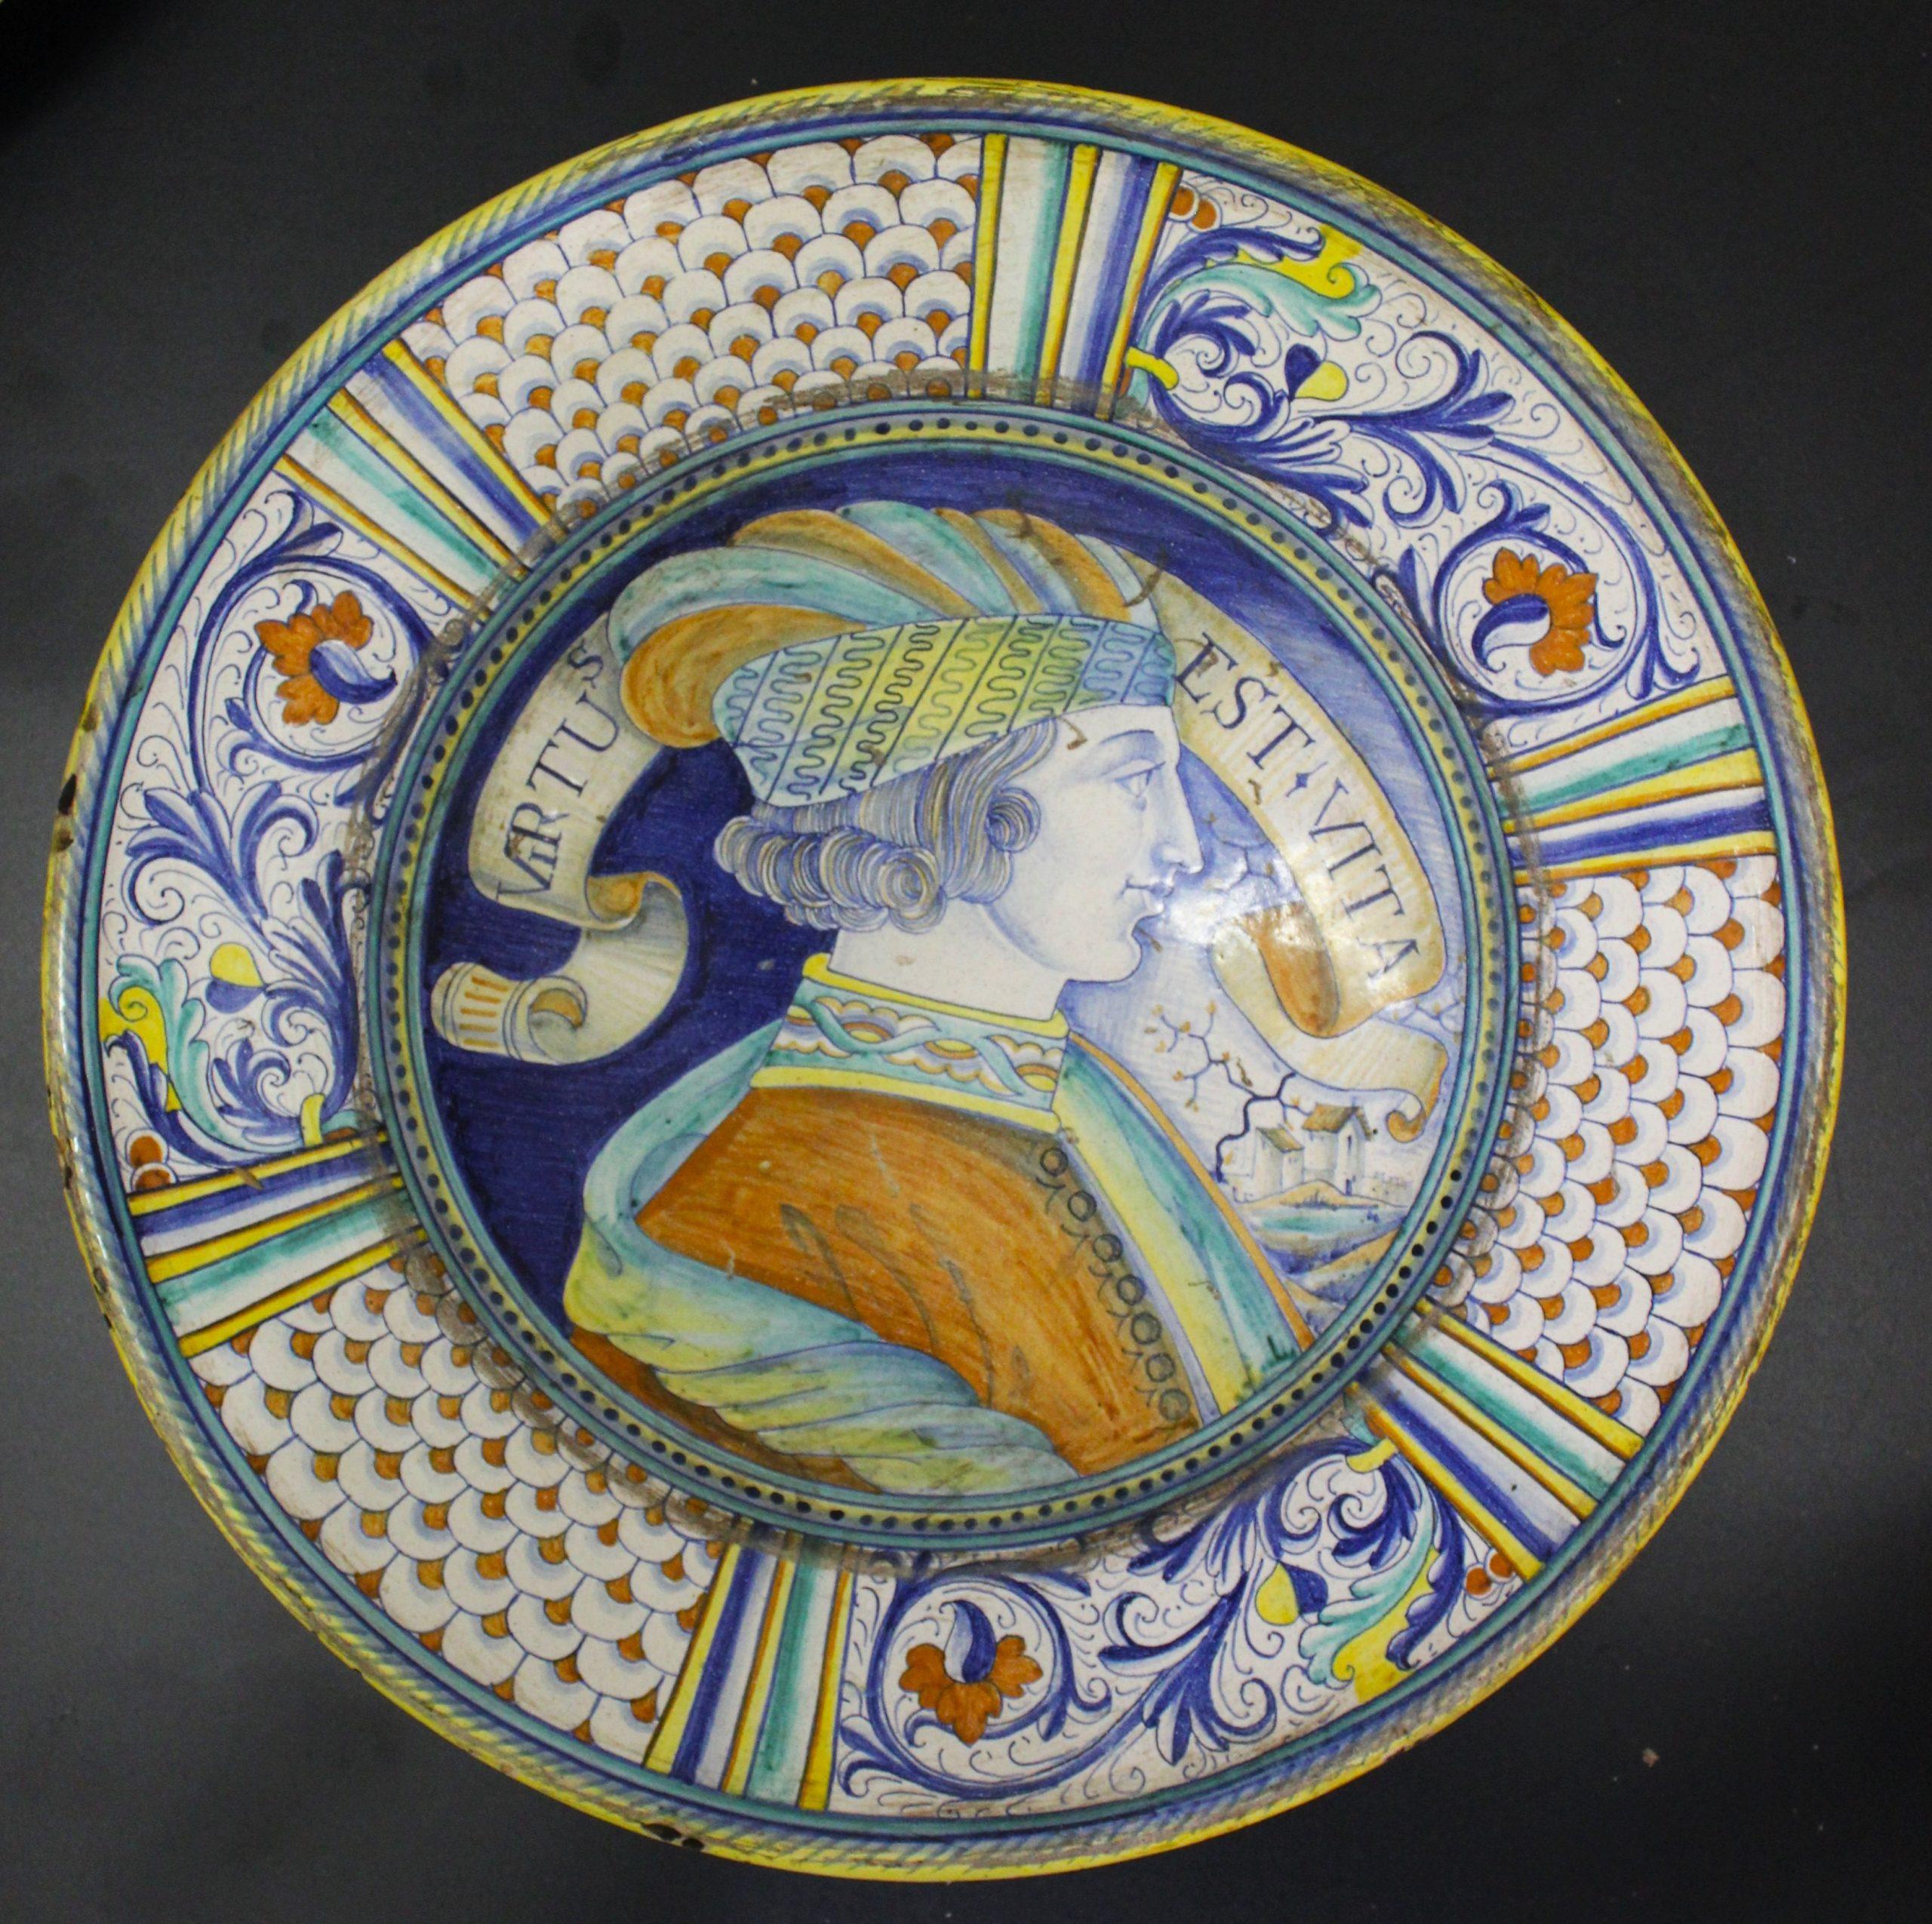 Umbria - Plate, Parade Plate - Renaissance style - Majolica, XIX century,ADDITIONAL PHOTOS, INFORMATION OF THE LOT AND QUOTE FOR SHIPPING COST CAN BE REQUEST BY SENDING AN EMAIL